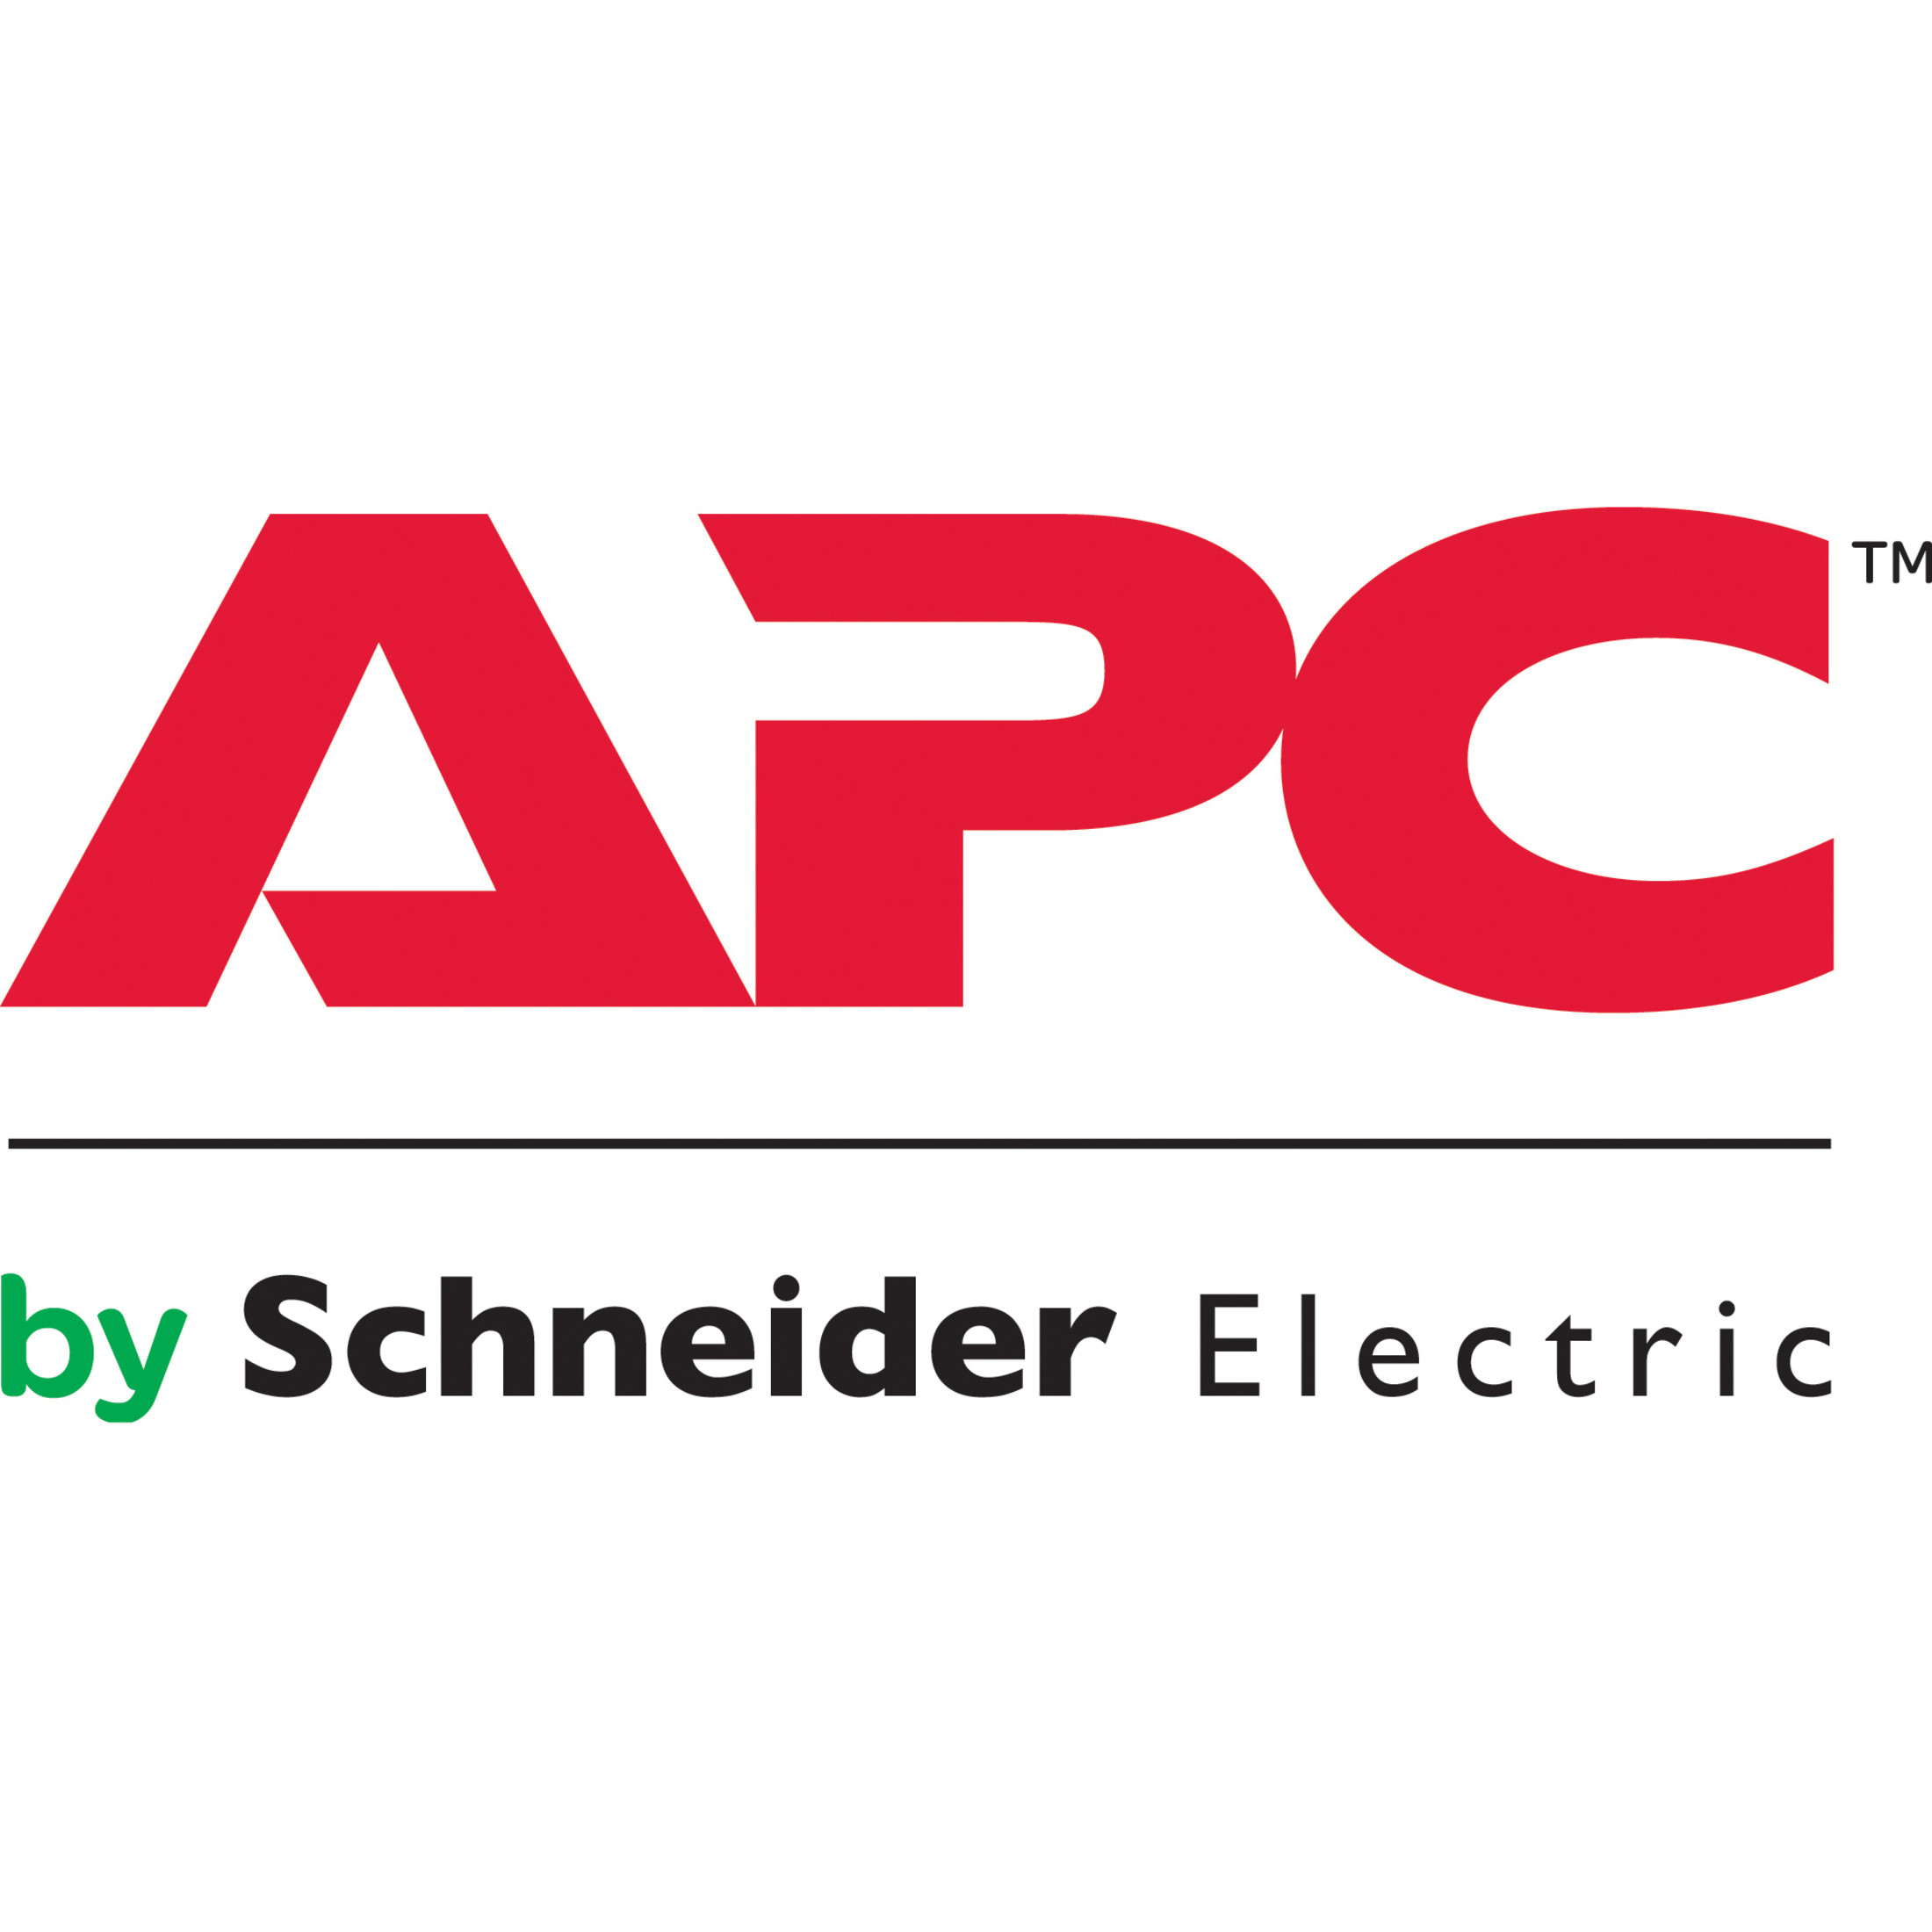 APC by Schneider Electric Advantage Plus Service PlanServiceOn-siteMaintenanceParts & LaborElectronic and Physica… WADVPLUS-AX-45